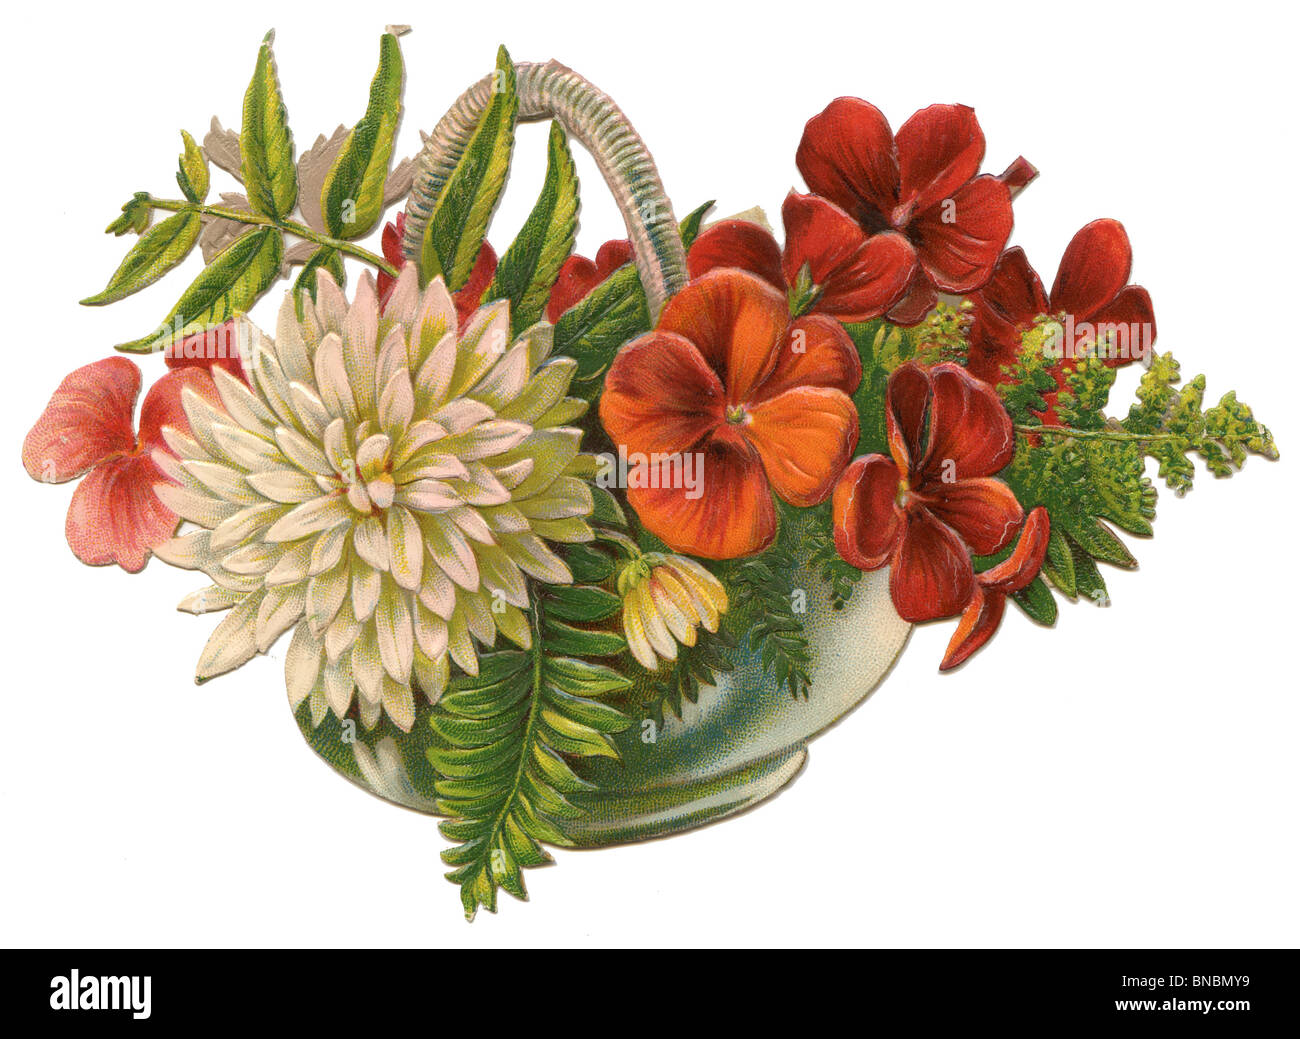 White Dahlia and Red Flowers in a Basket Stock Photo